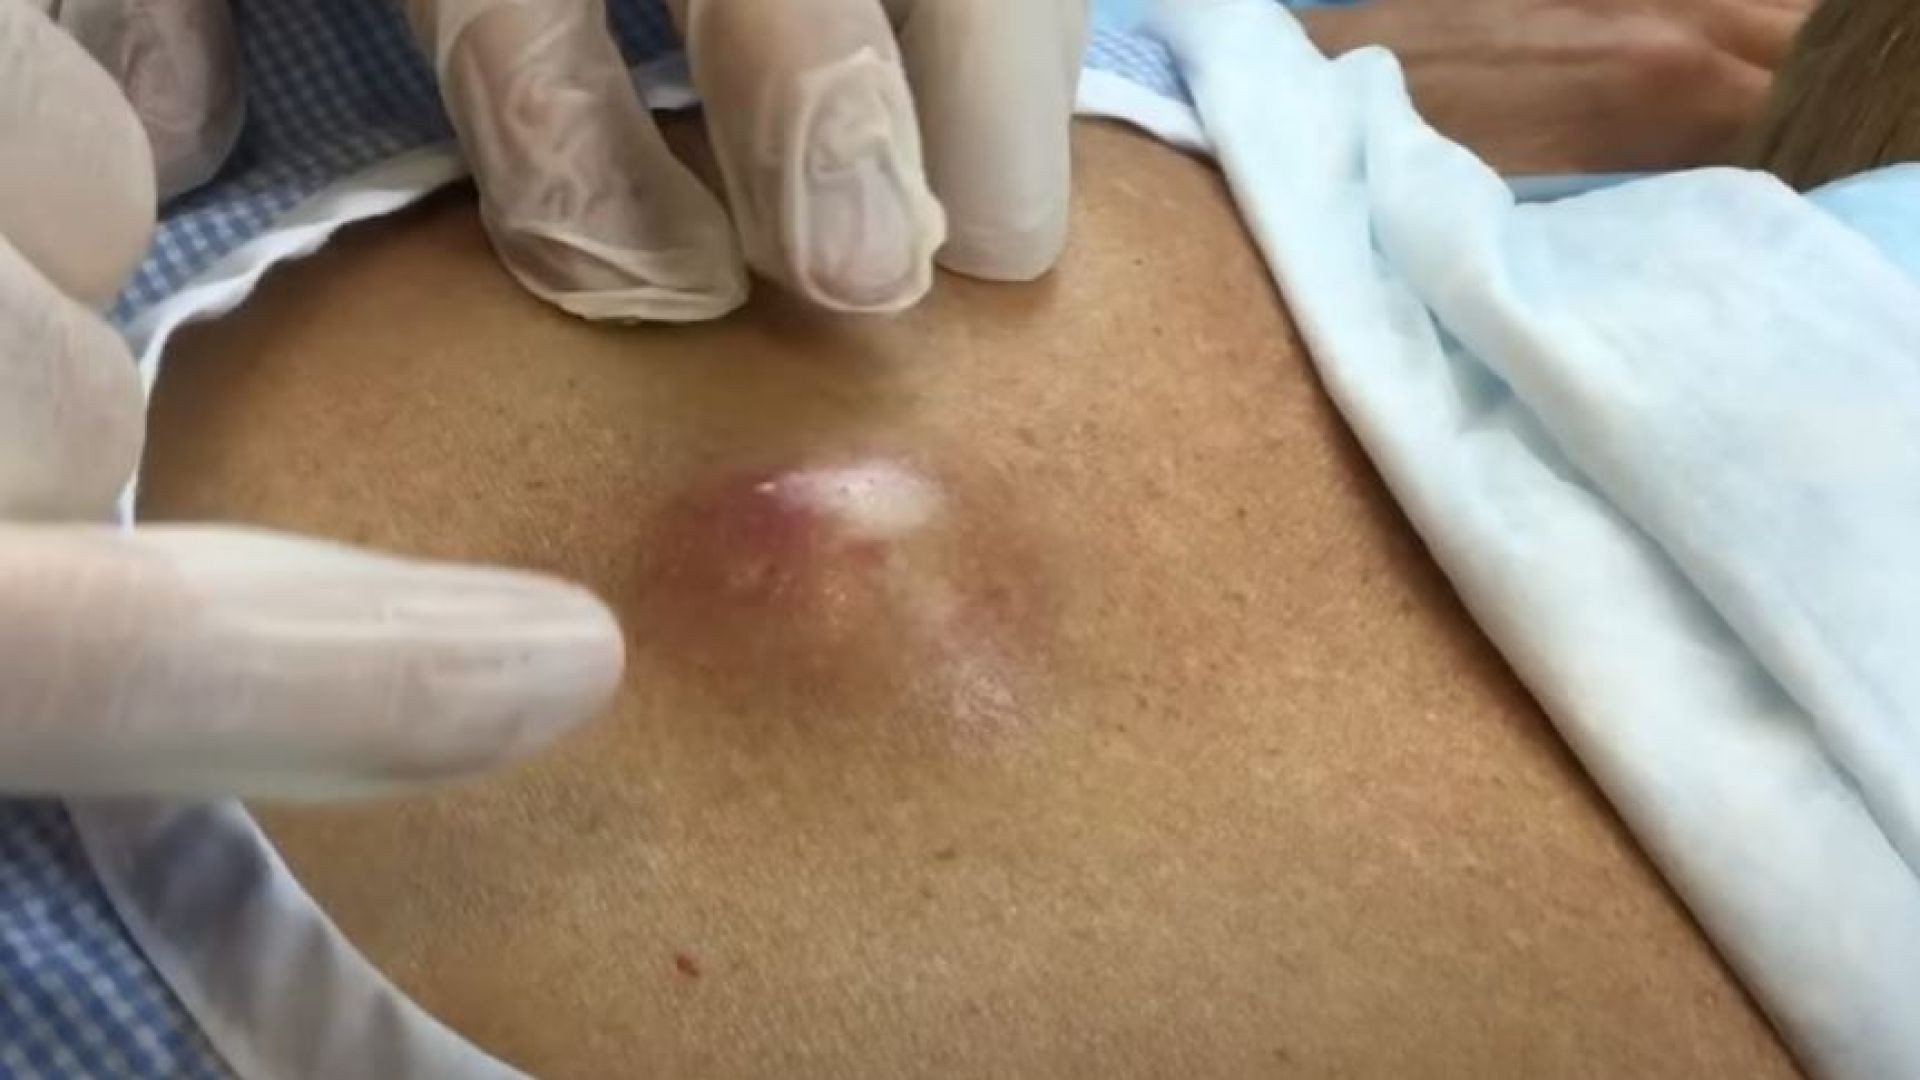 Infected Cyst on Mid-back